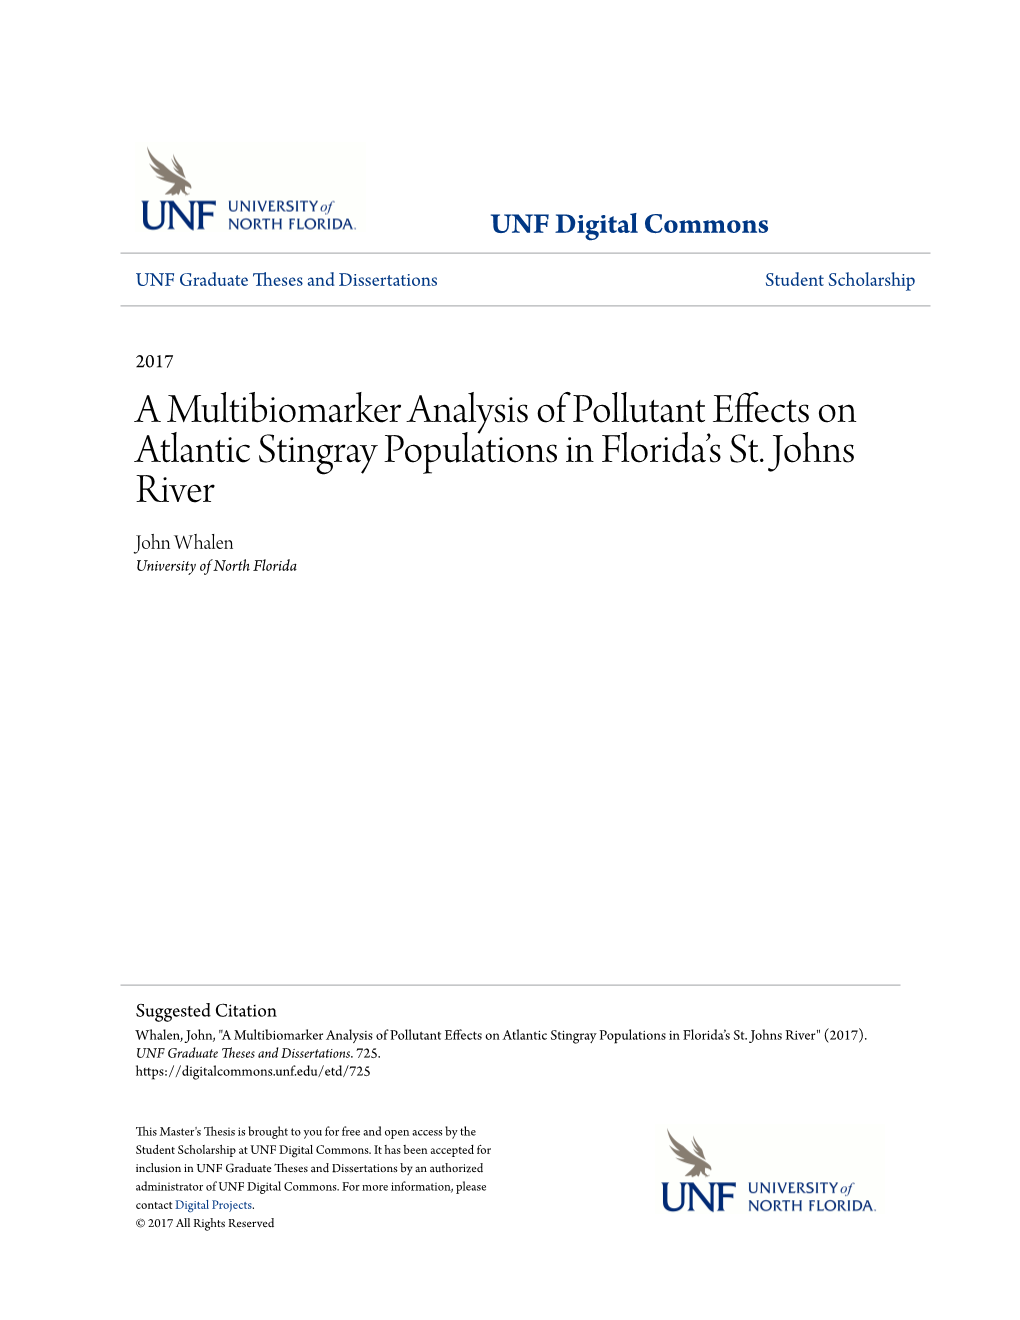 A Multibiomarker Analysis of Pollutant Effects on Atlantic Stingray Populations in Florida’S St